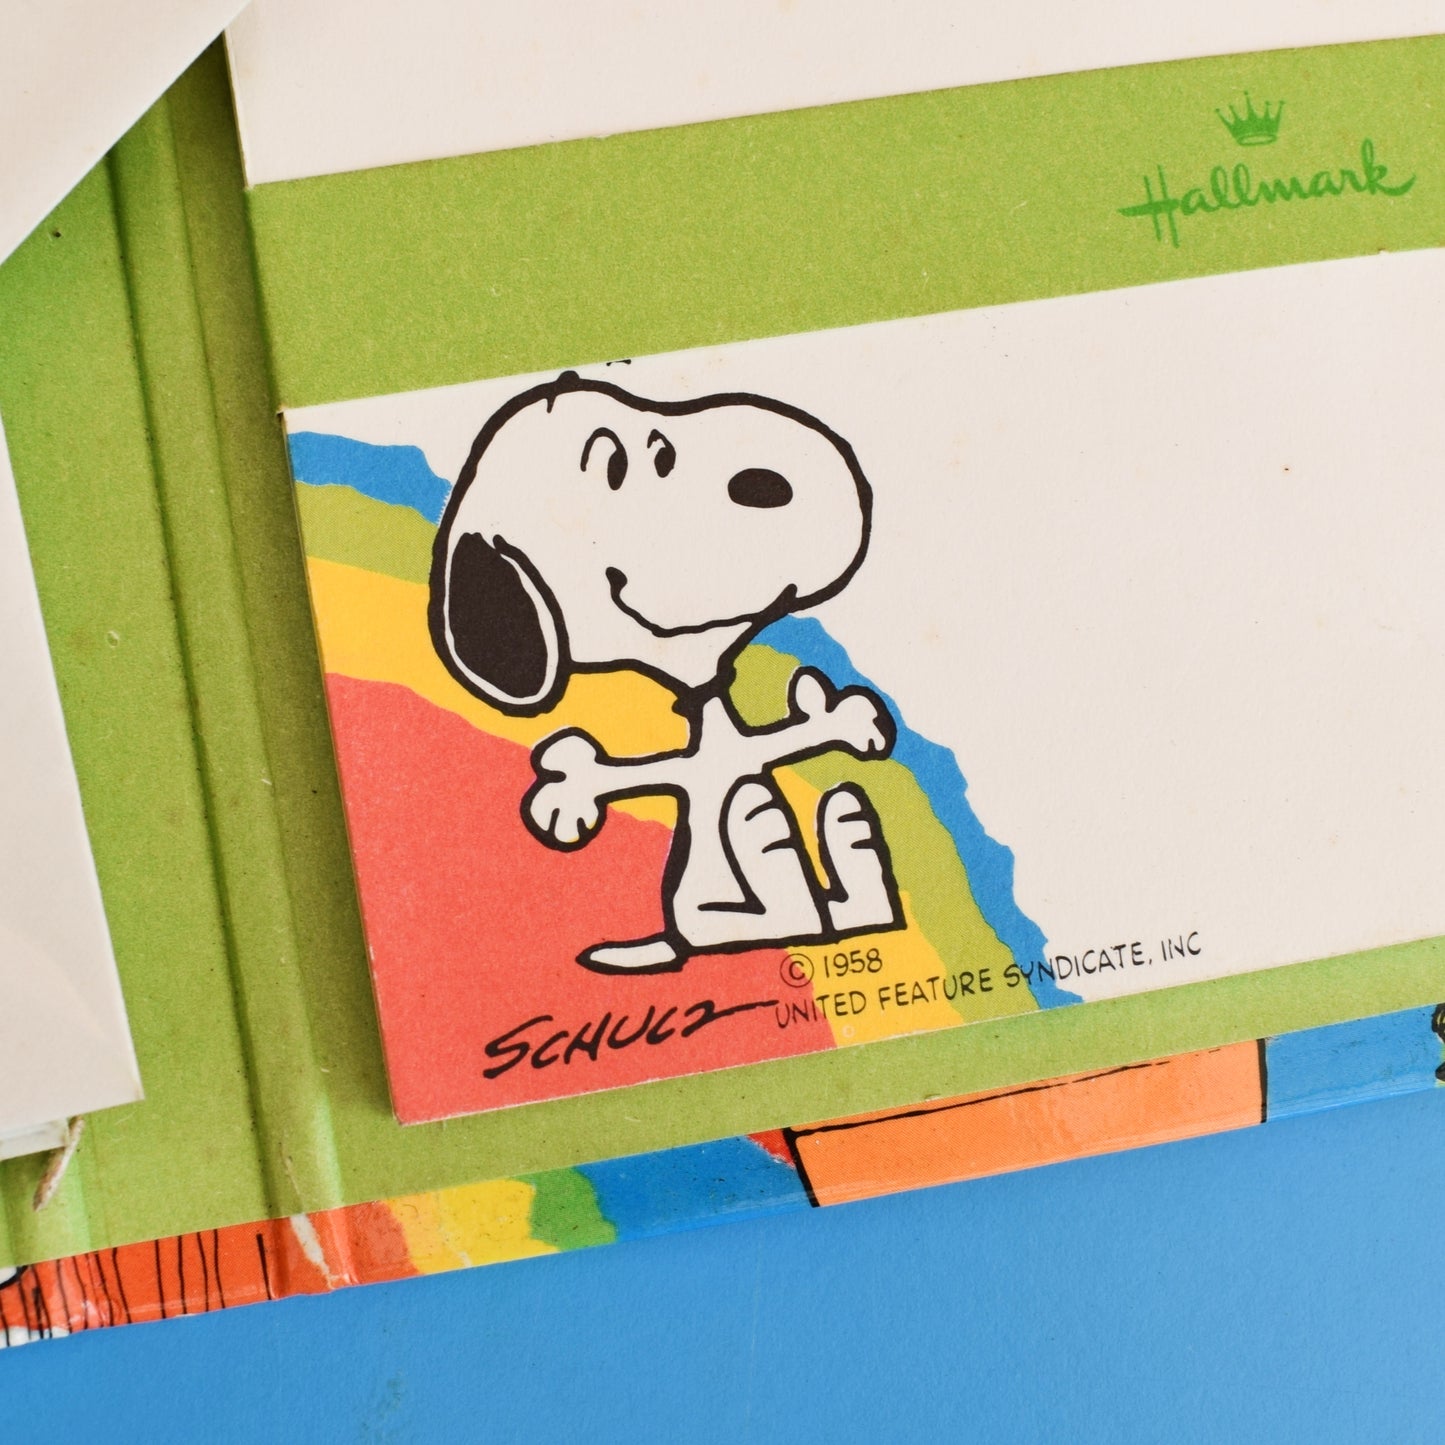 Vintage 1970s Snoopy Writing Paper Set